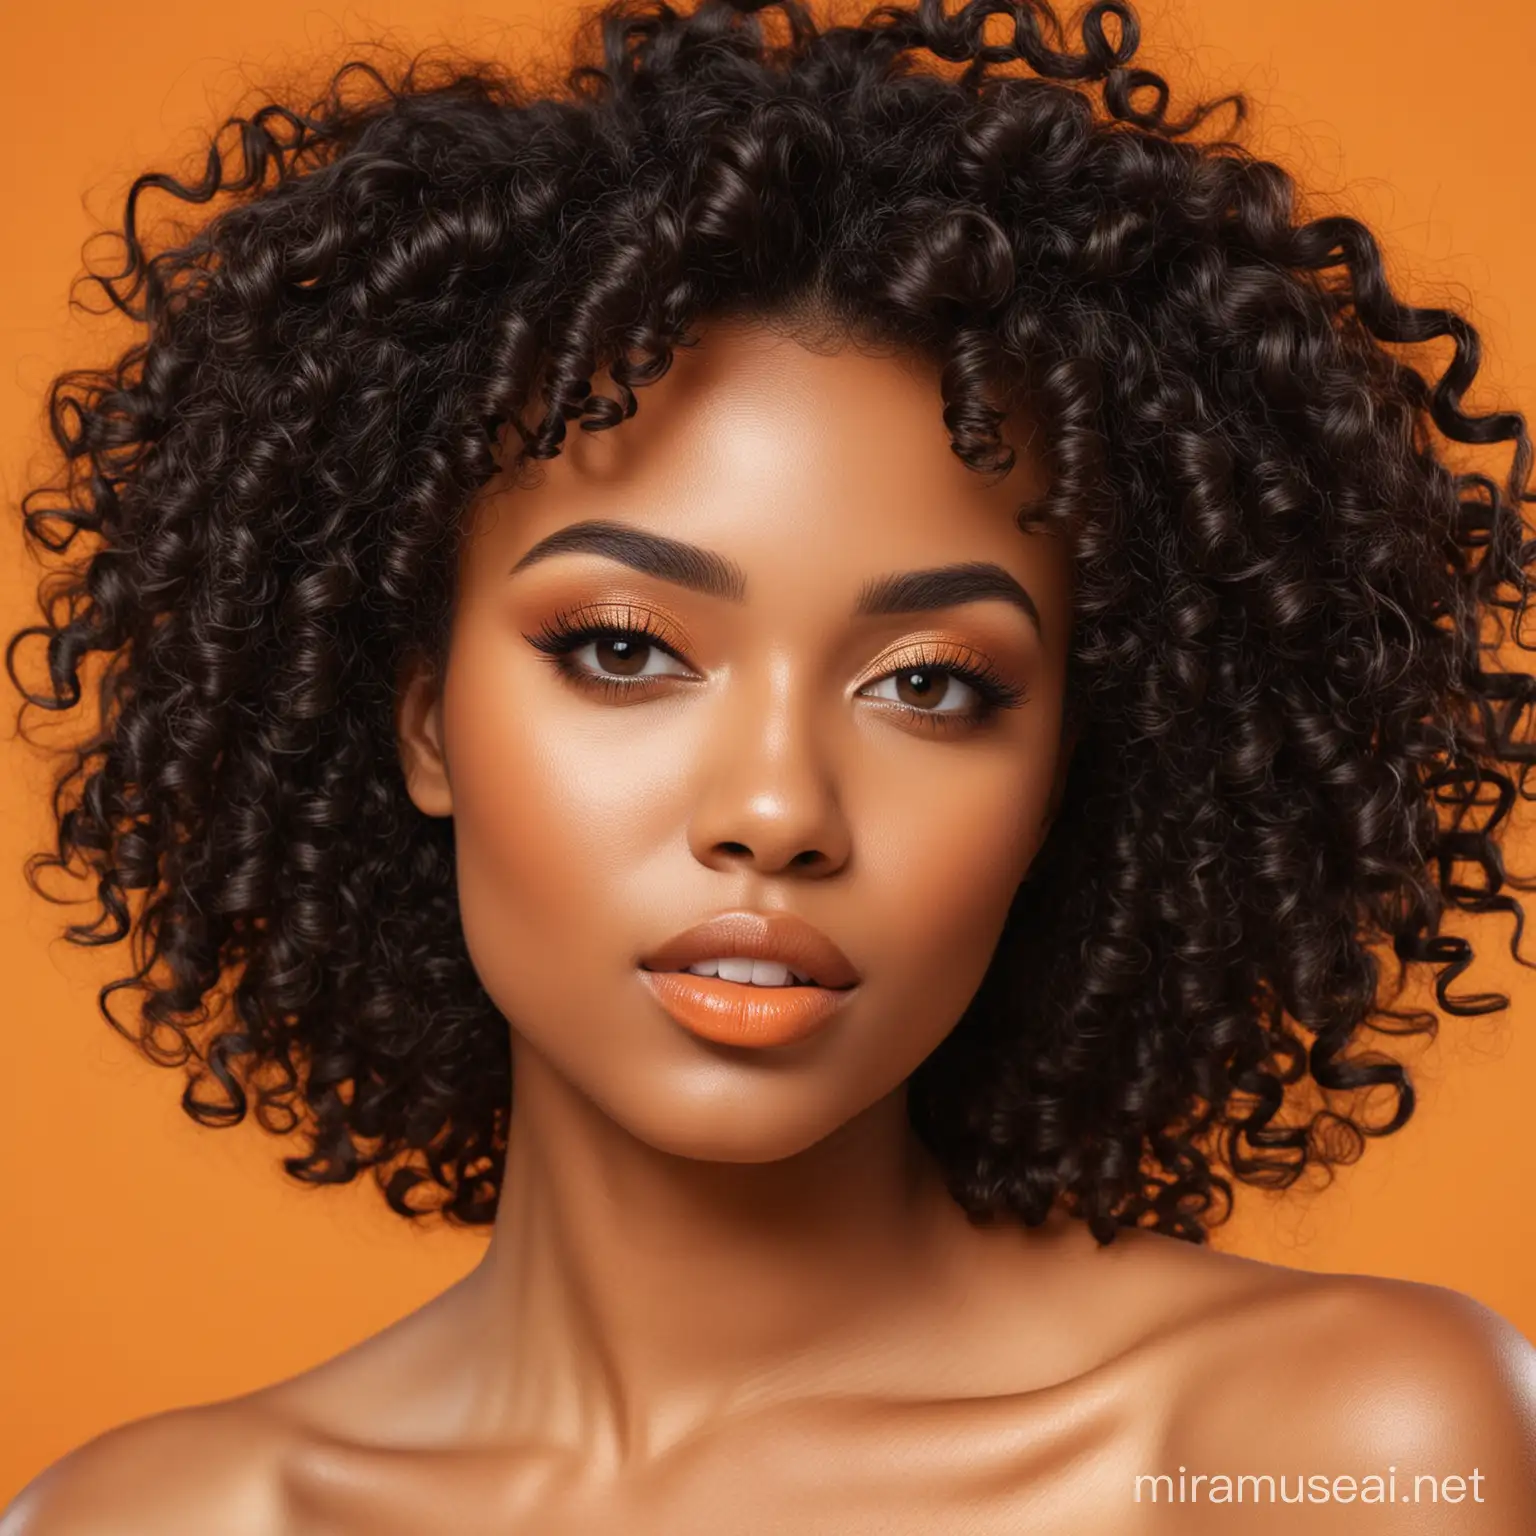 Sexy Black dark-skinned woman with a bright curl hairstyle with an orange background. There is whitish skin cream on both her cheeks and forehead.